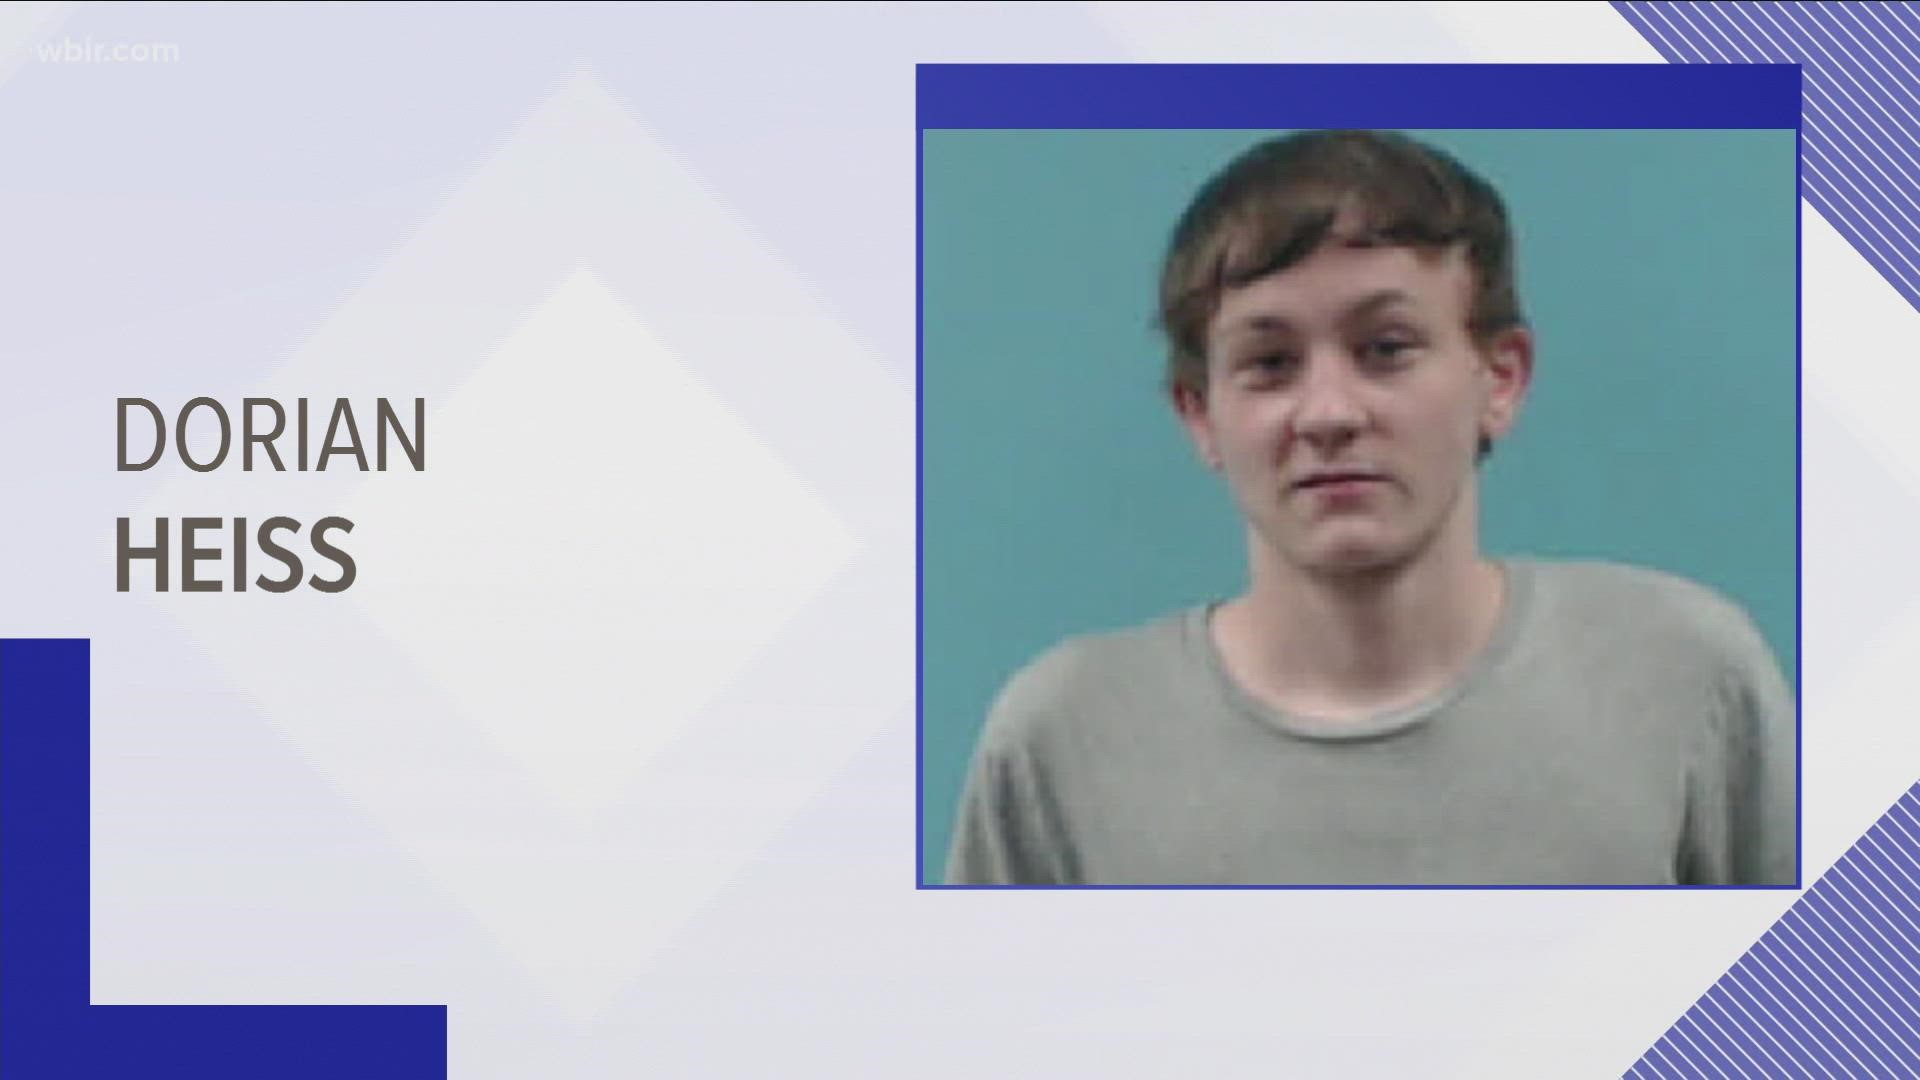 Investigators said the man killed 19-year-old George Fleagle in a game of Russian roulette after dry firing a gun at other witnesses.